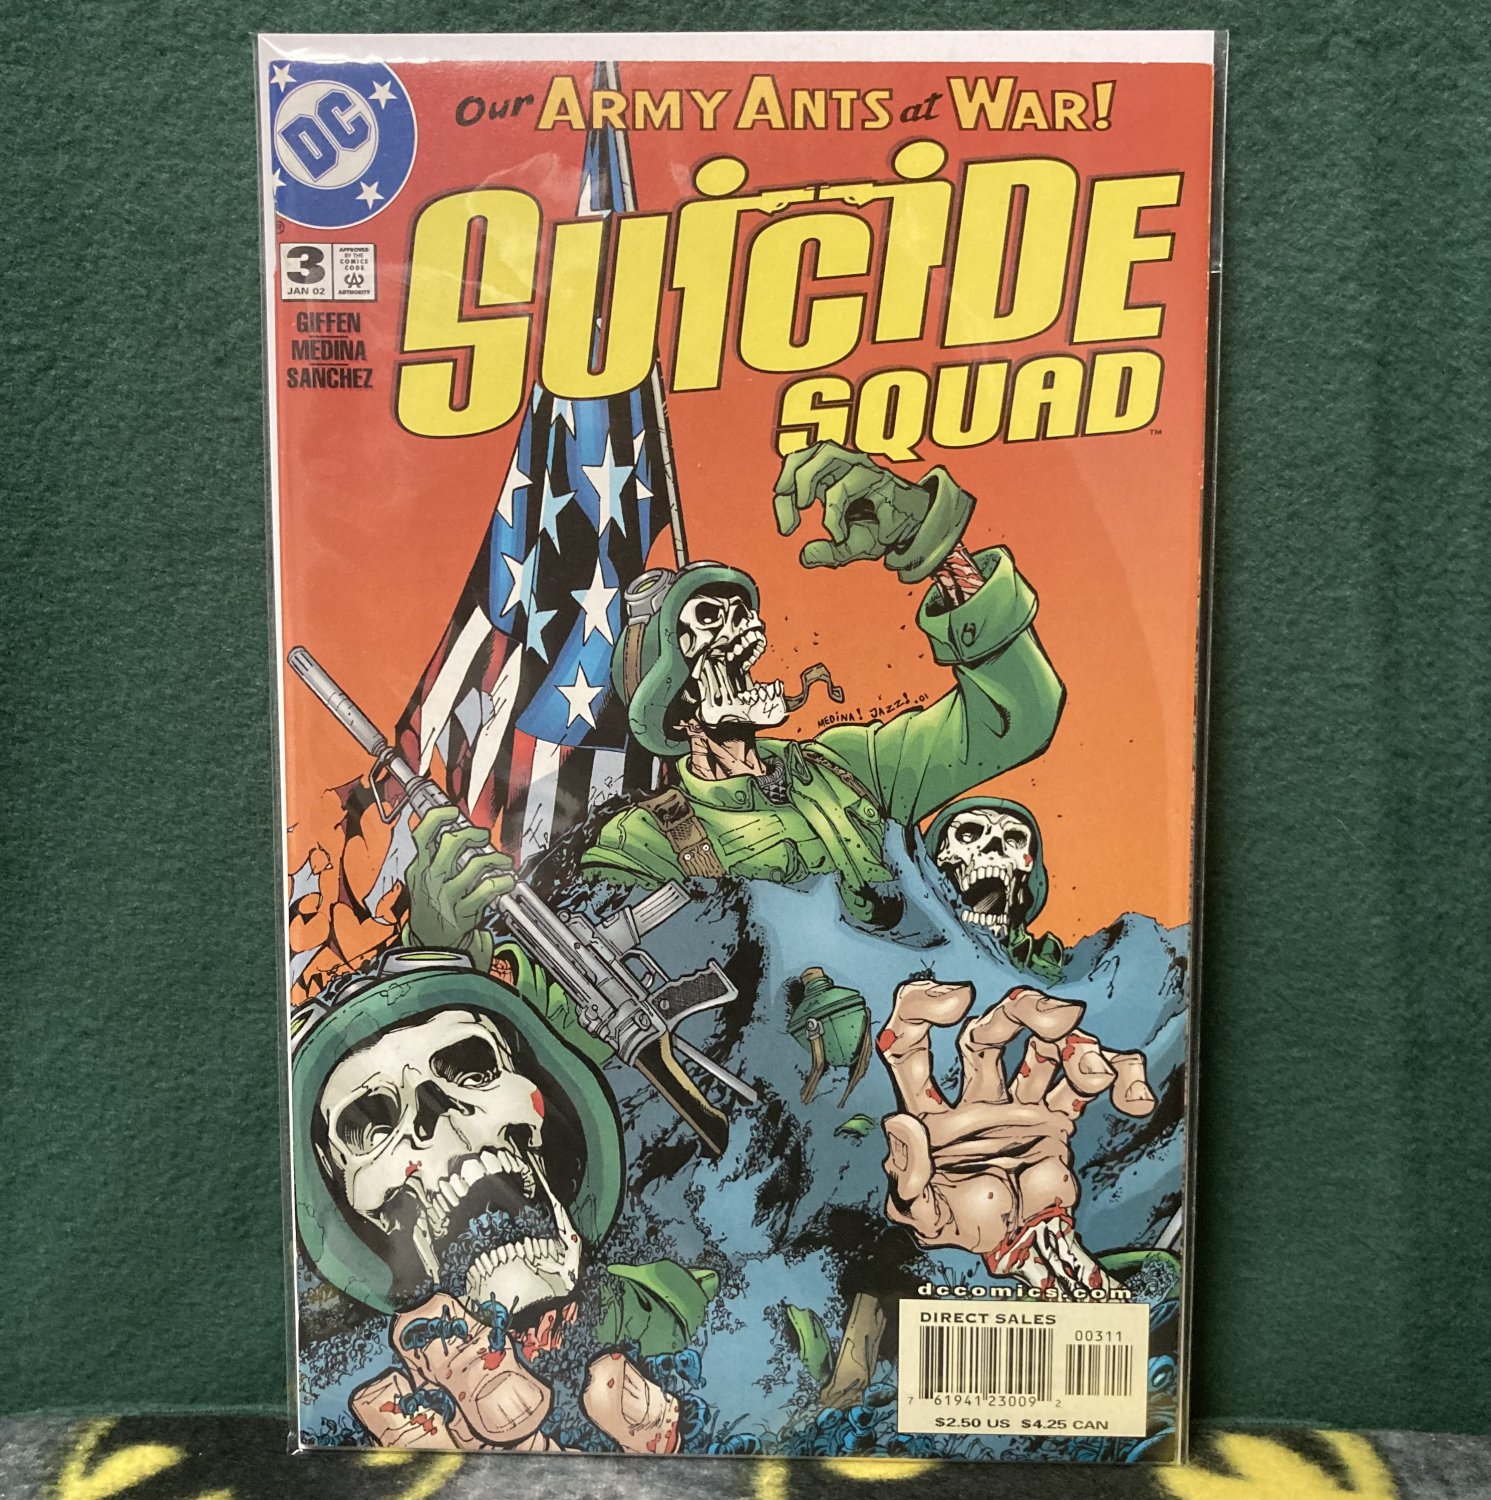 SUICIDE SQUAD War Crimes #3 - DC Comics 2002 - Our Army Ants at War